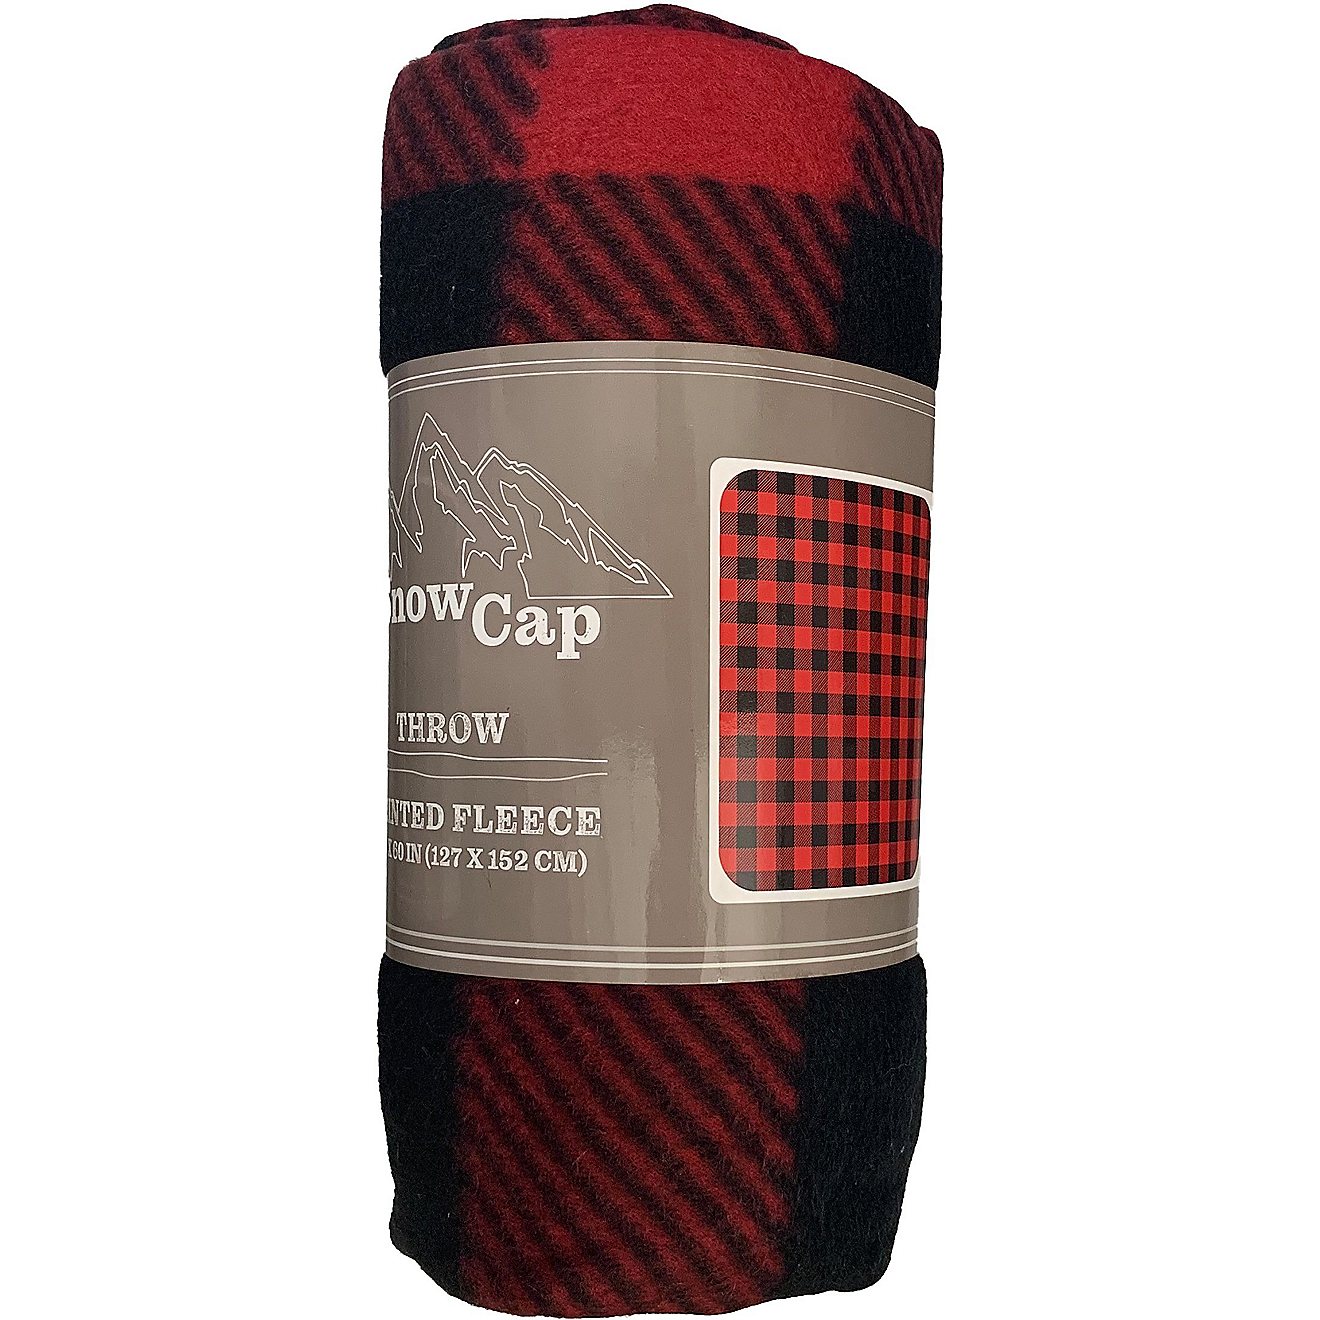 Snowcap 50 in x 60 in Red Fleece Buffalo Check Throw Blanket                                                                     - view number 2